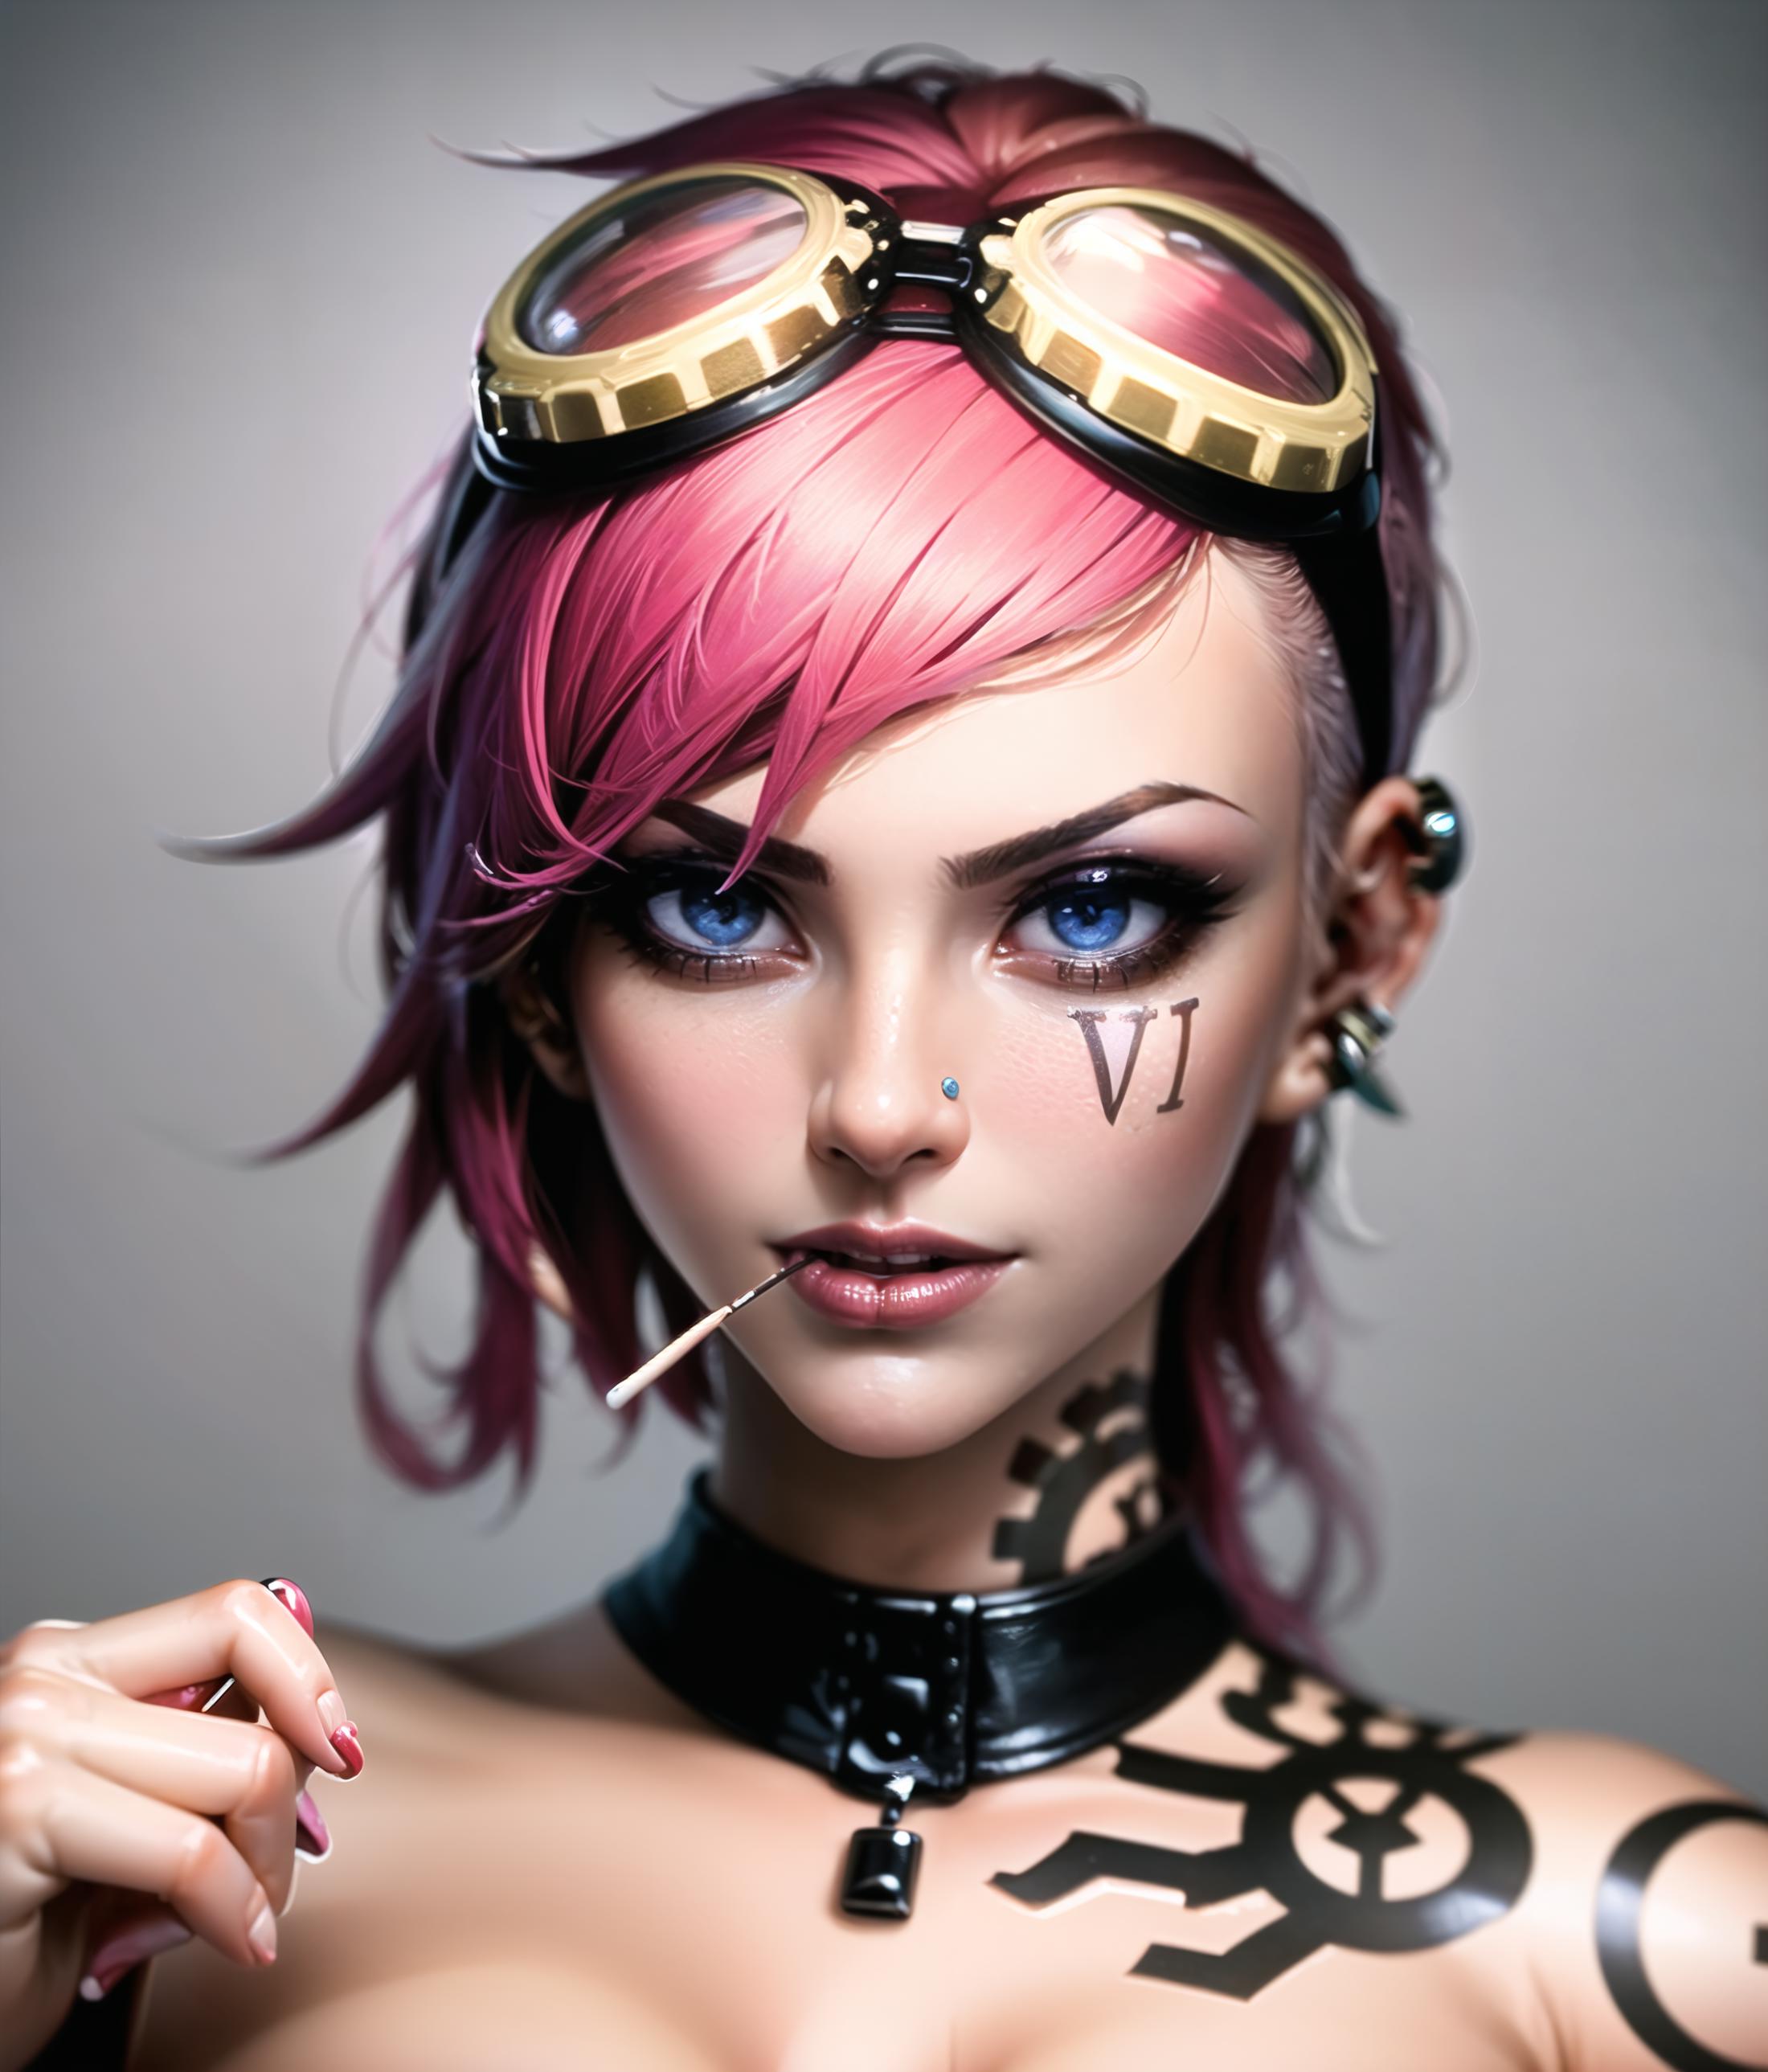 Vi League of Legends (base skin) by Kangaxx image by Kangaxx12282